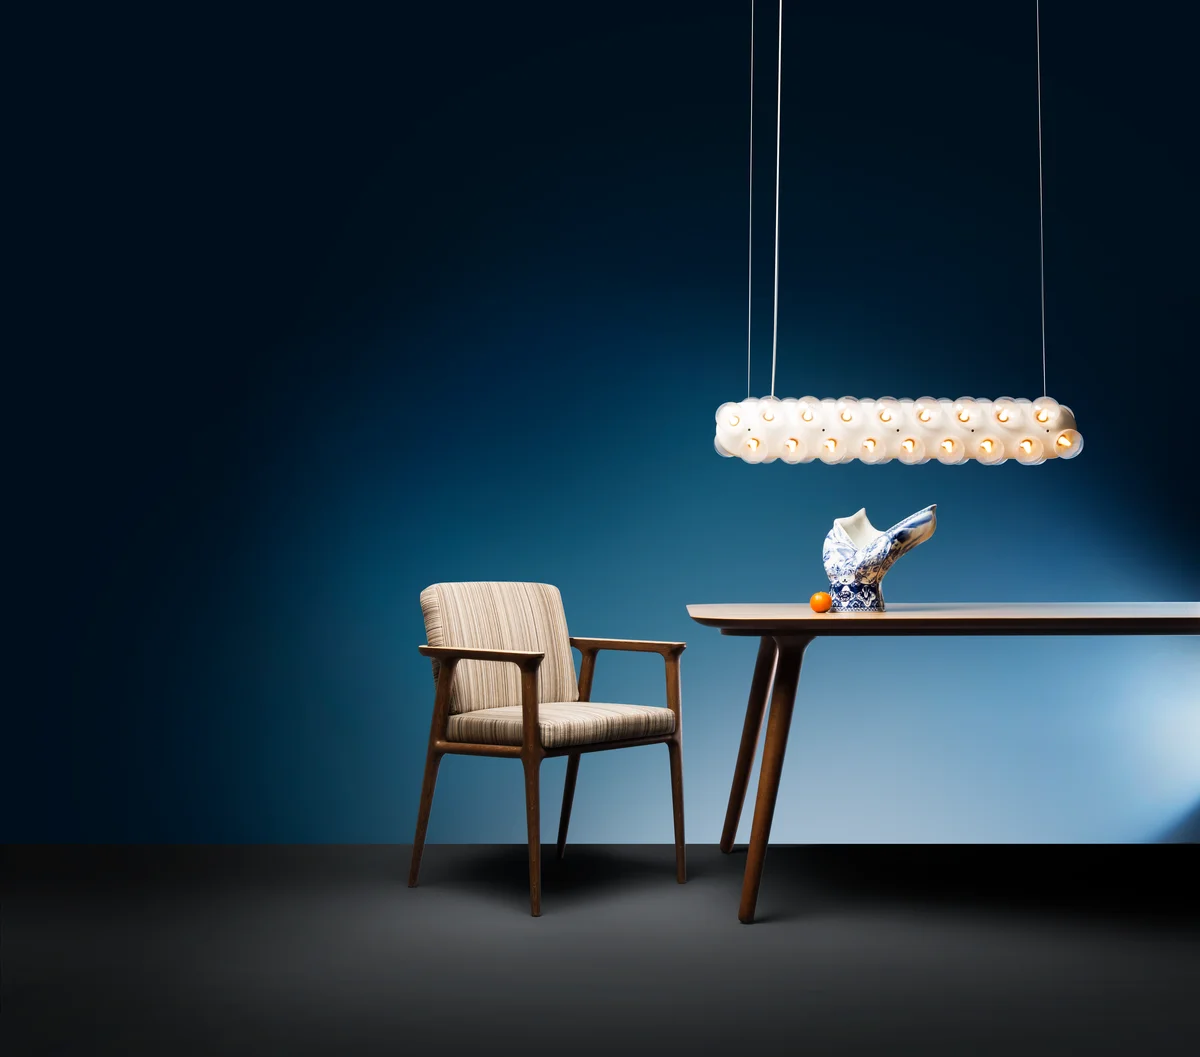 Poetic composition Zio Dining Chair, Zio Dining Table, Blow Away Vase and Prop Light suspension